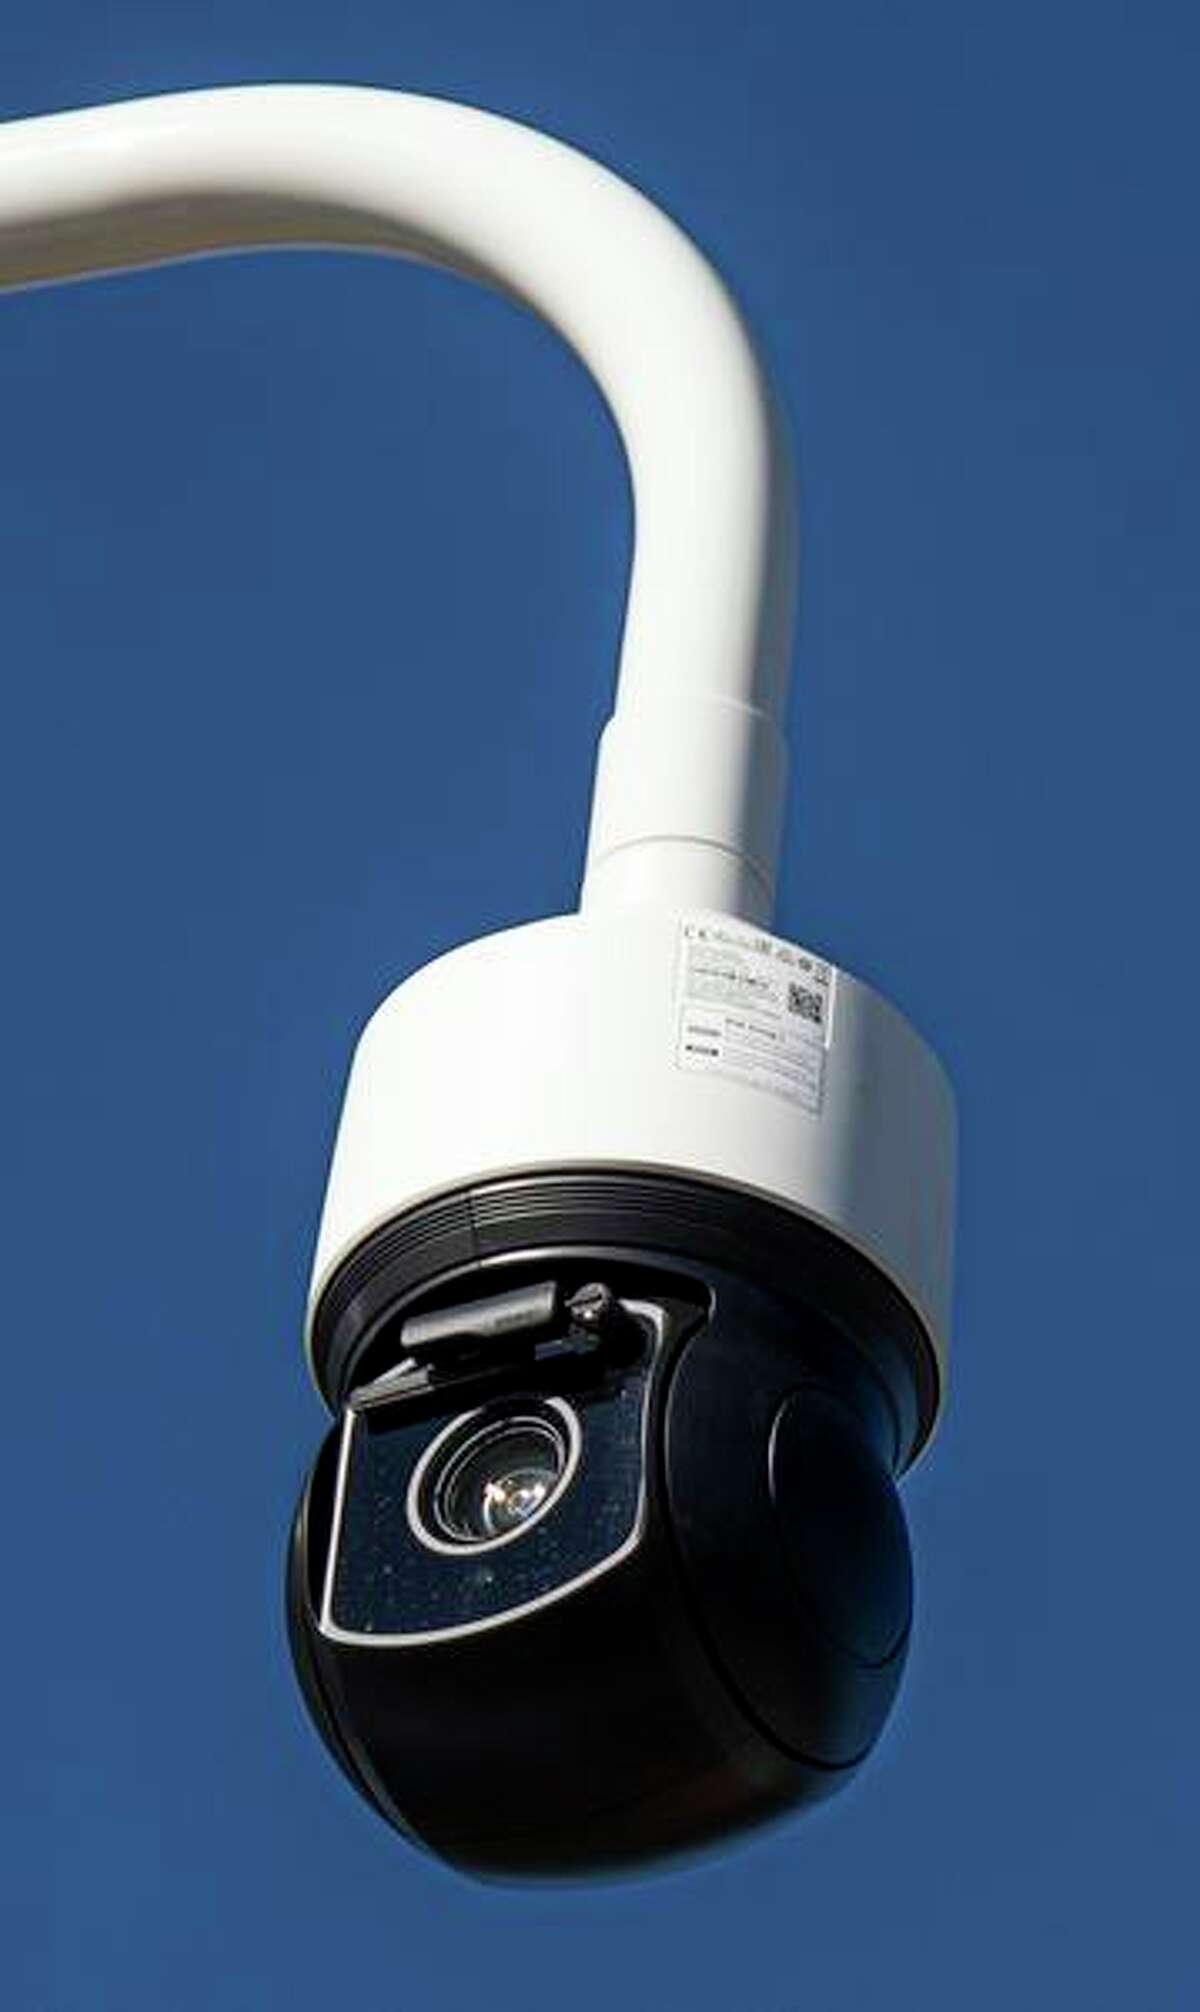 A Pano AI fire-detection camera on a cell tower in Sonoma County.